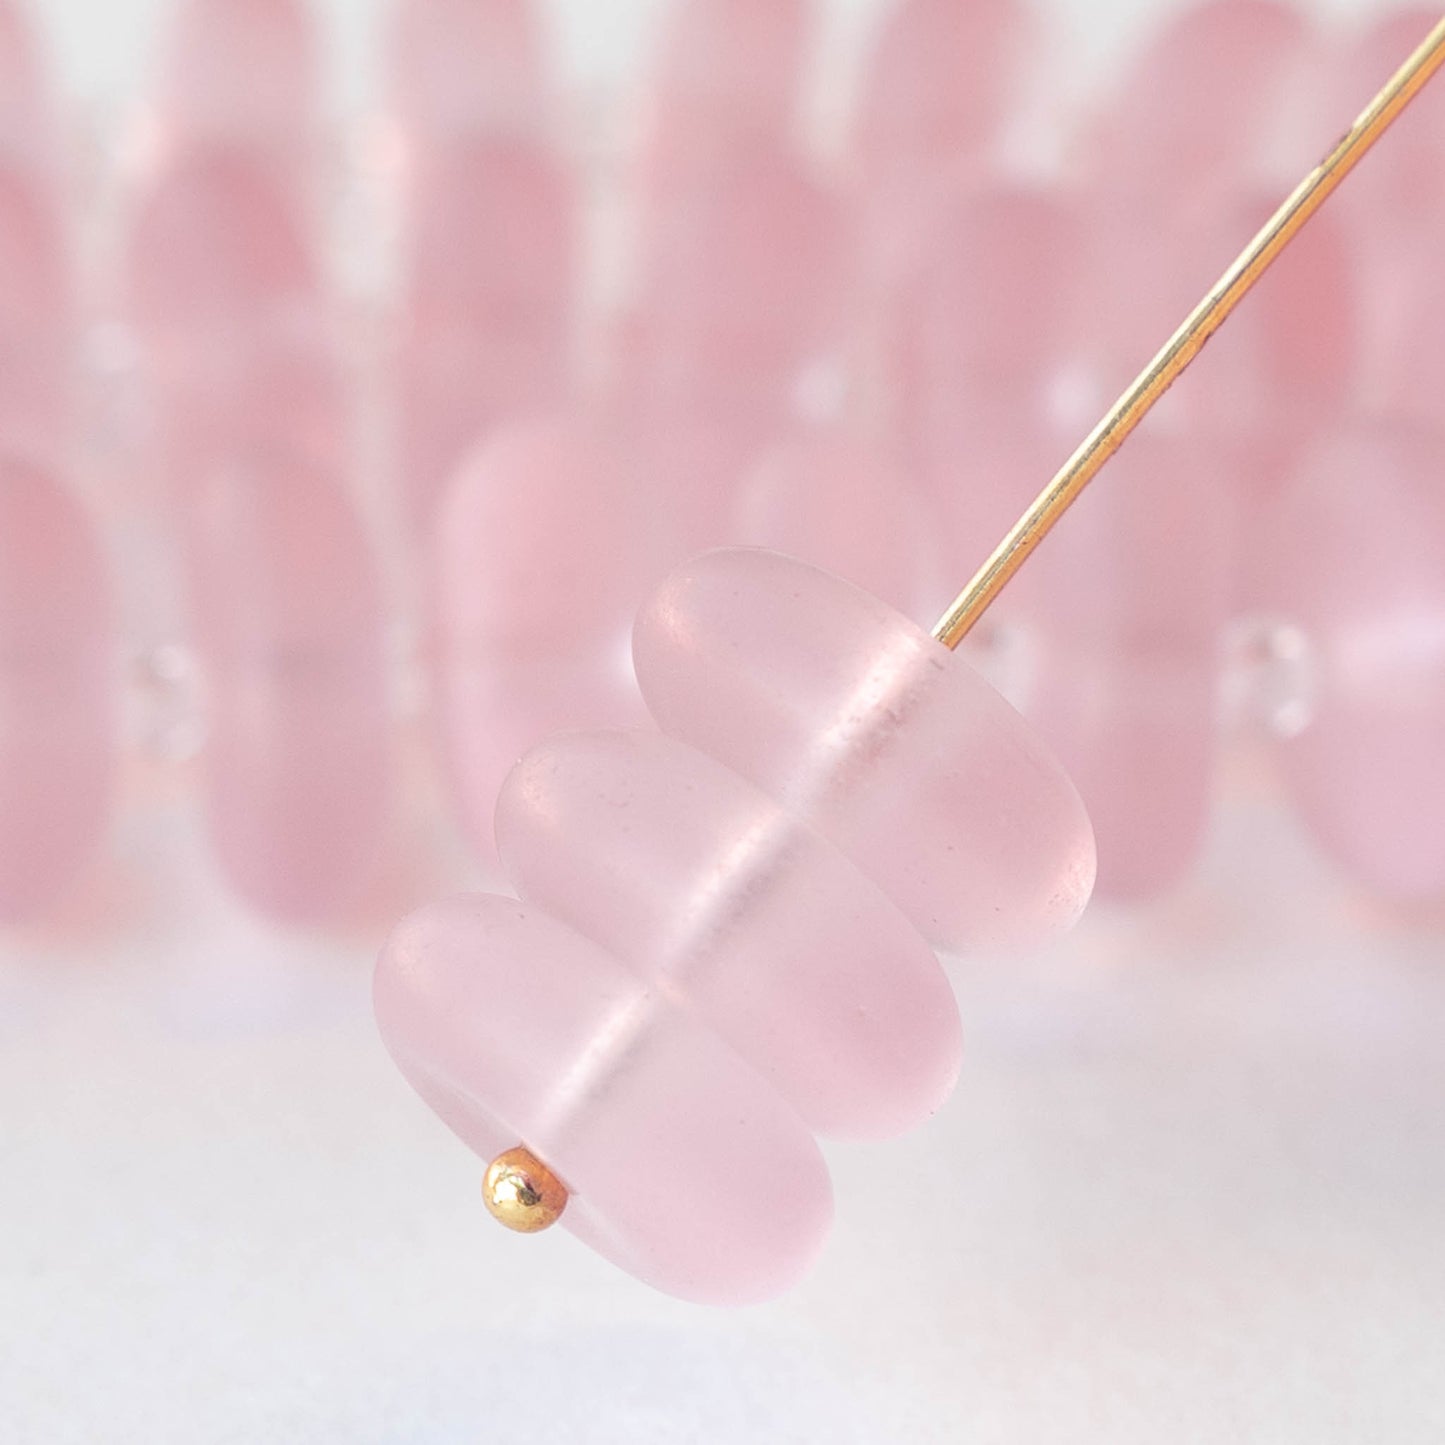 5x12mm Frosted Glass Rondelle - Pink - 28 Beads